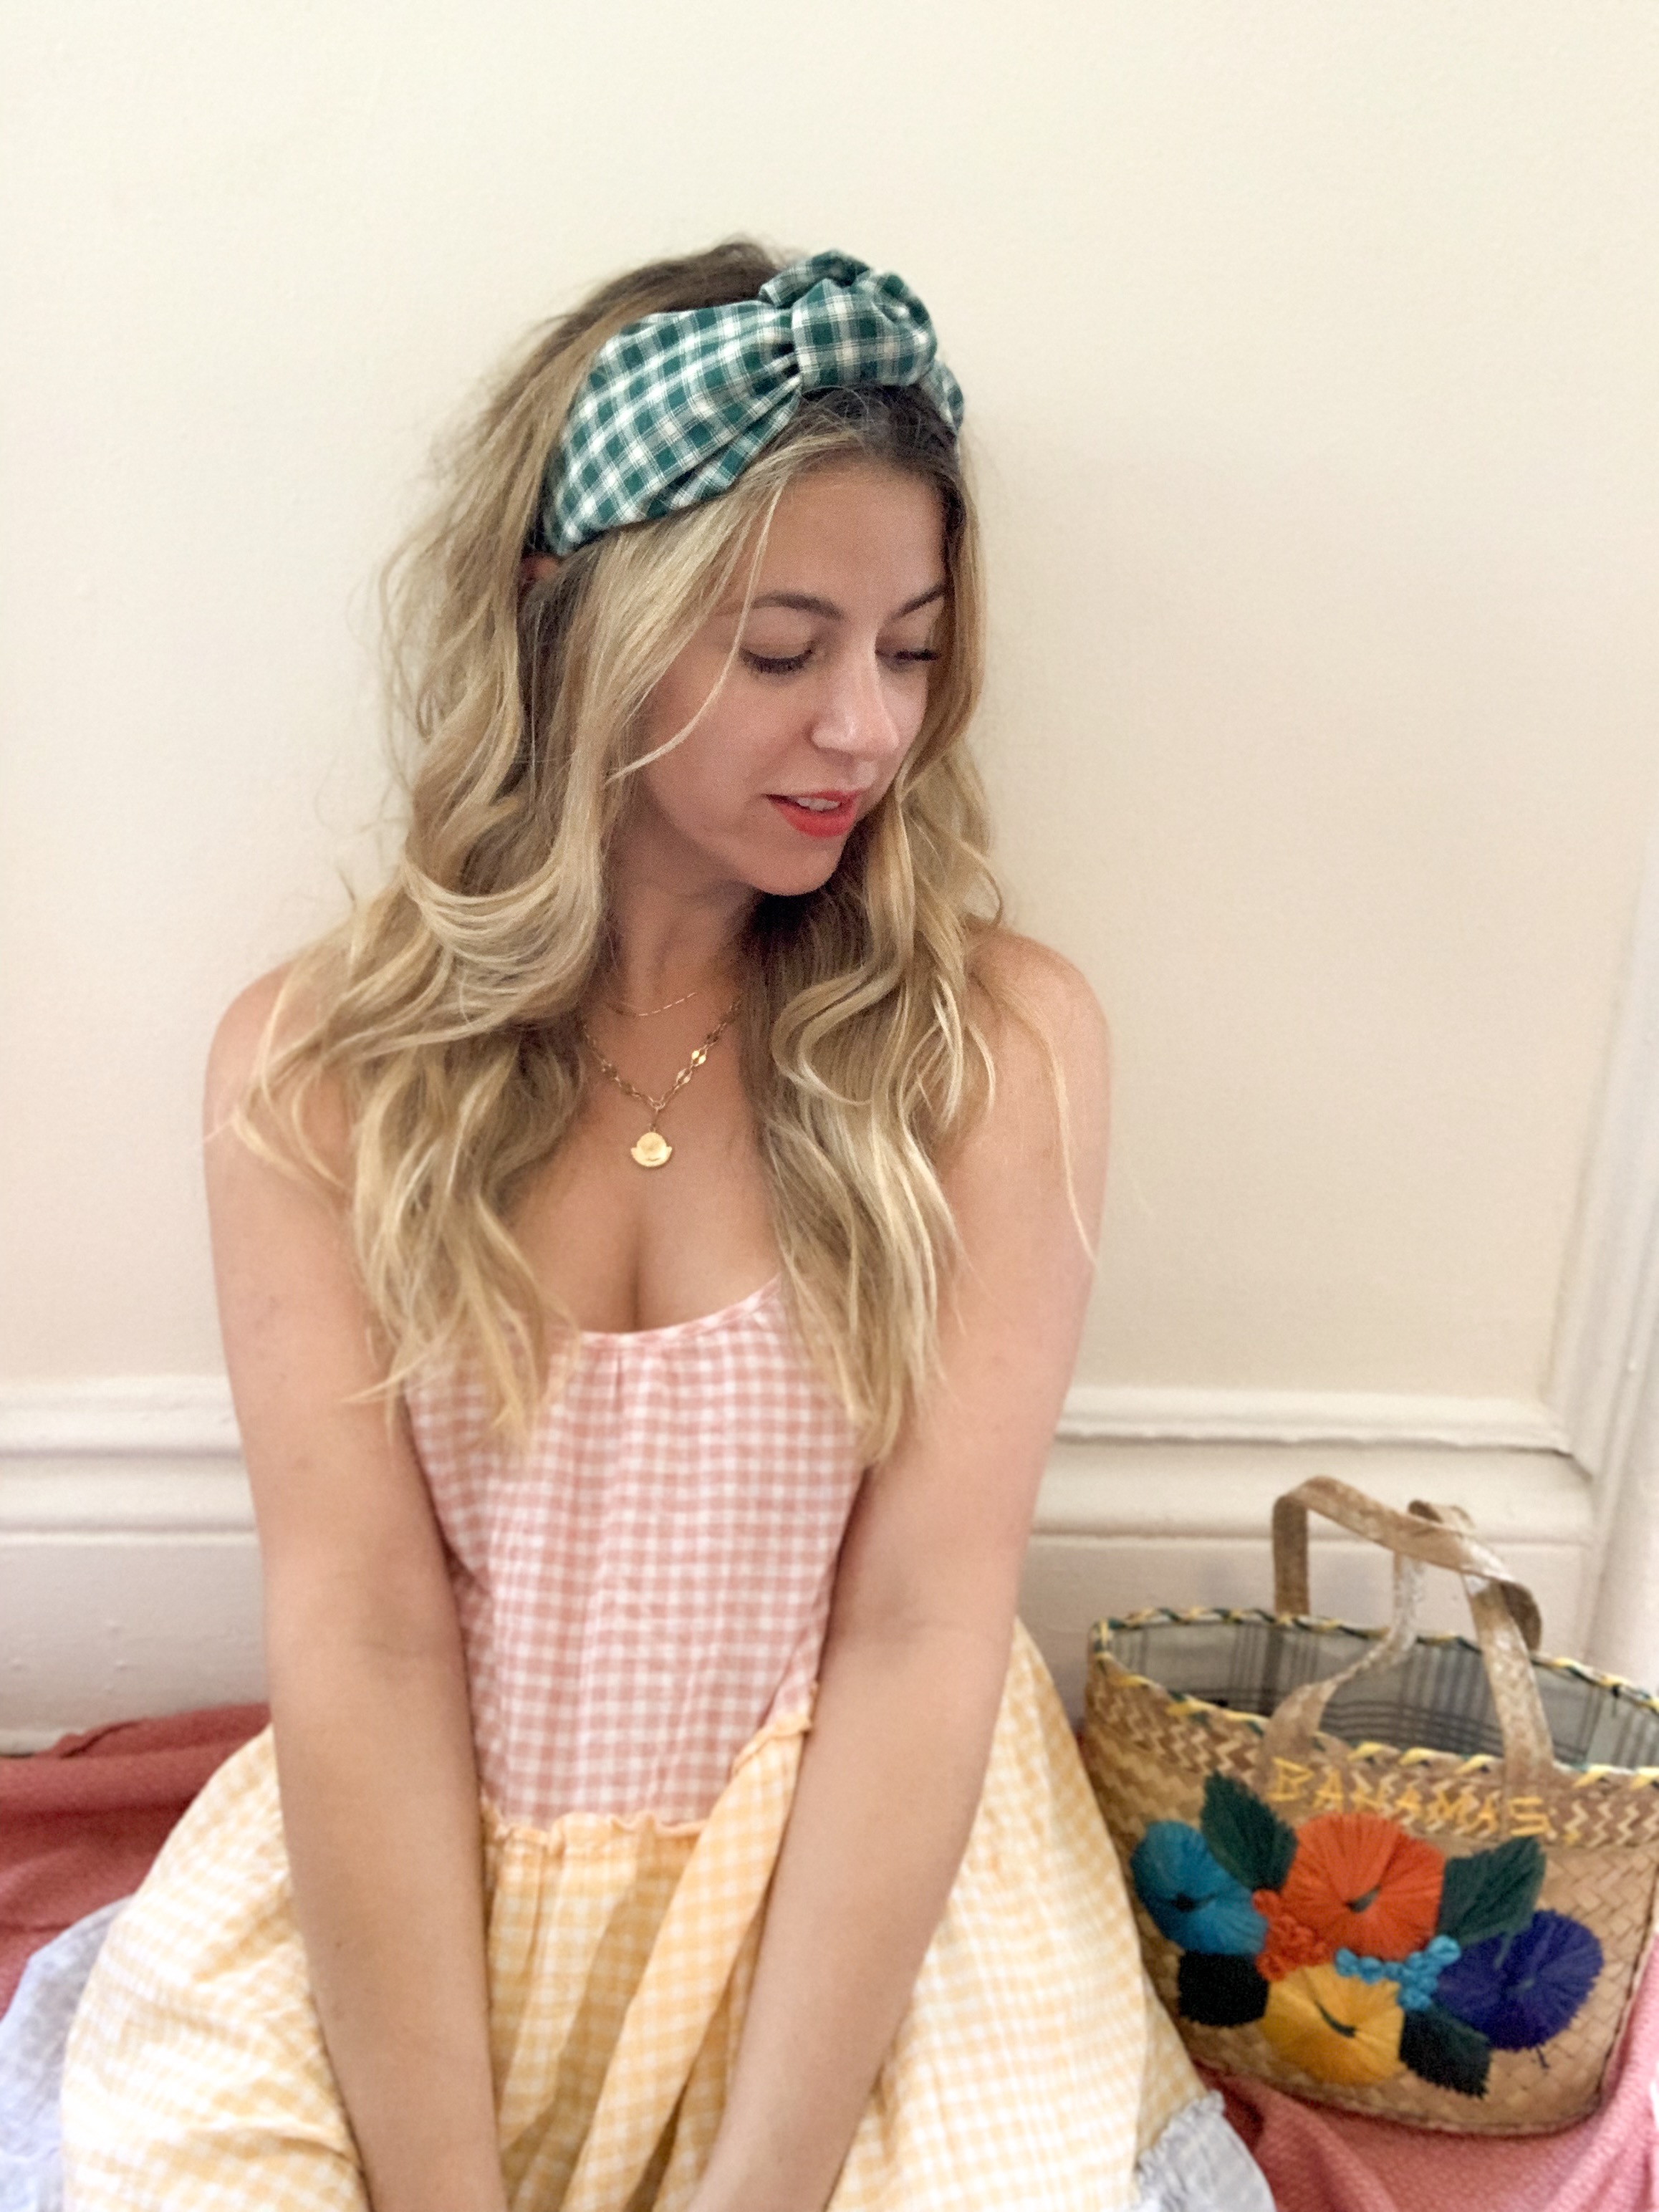 The Picnic Knotted Headband